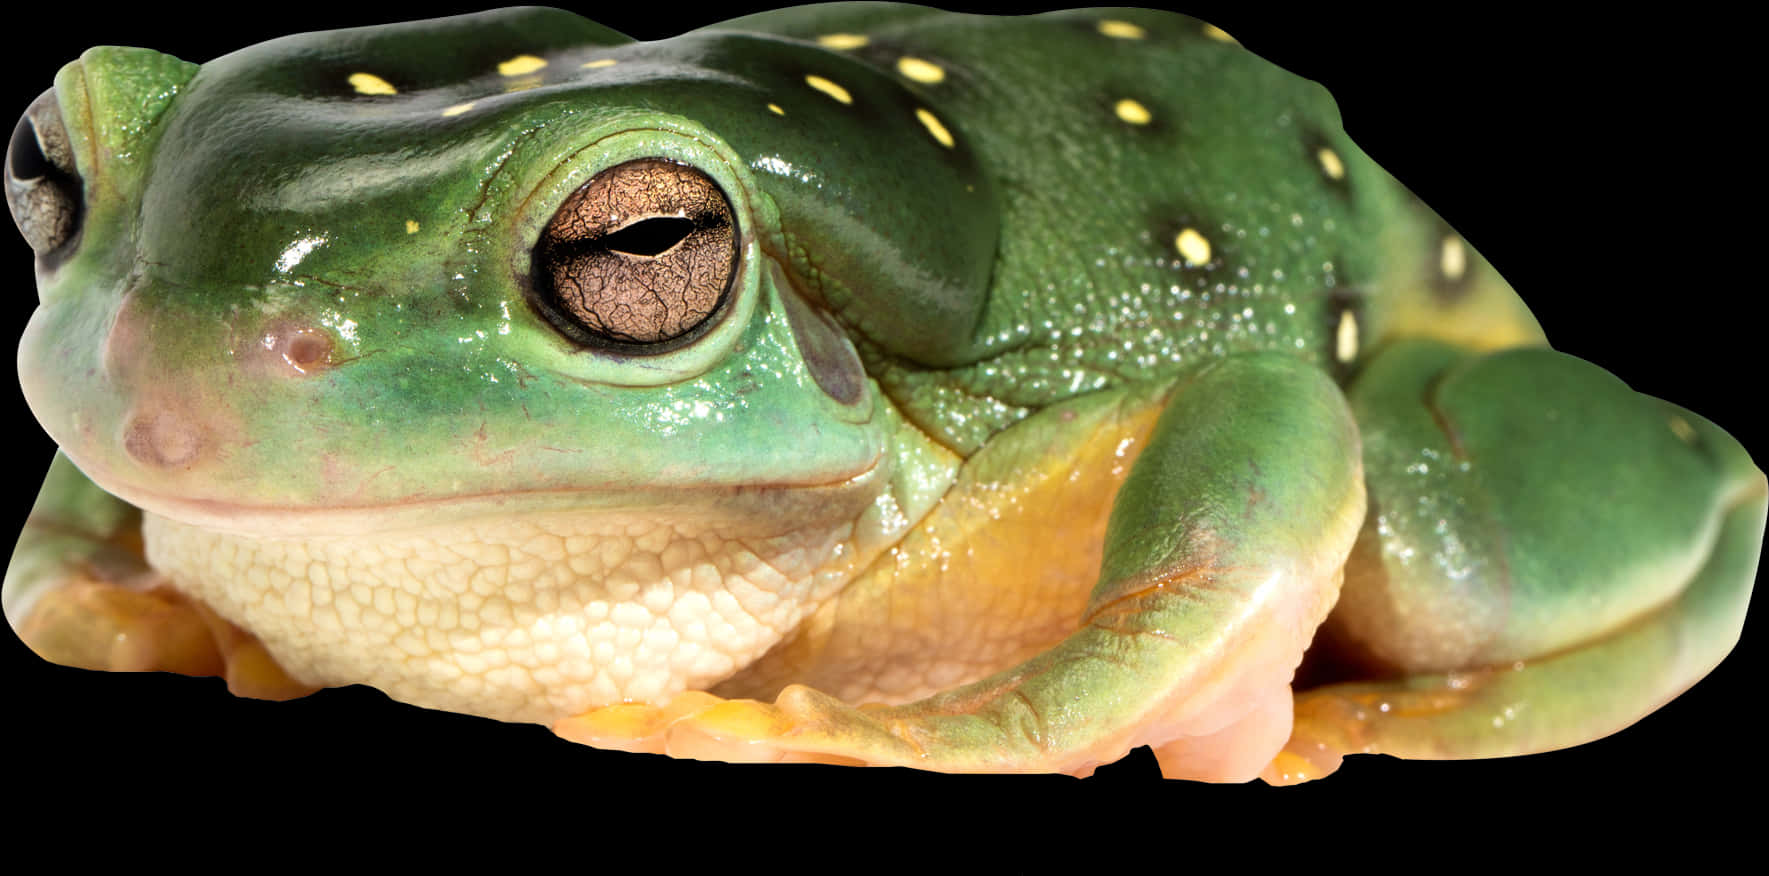 Green Spotted Frog Closeup.jpg PNG image